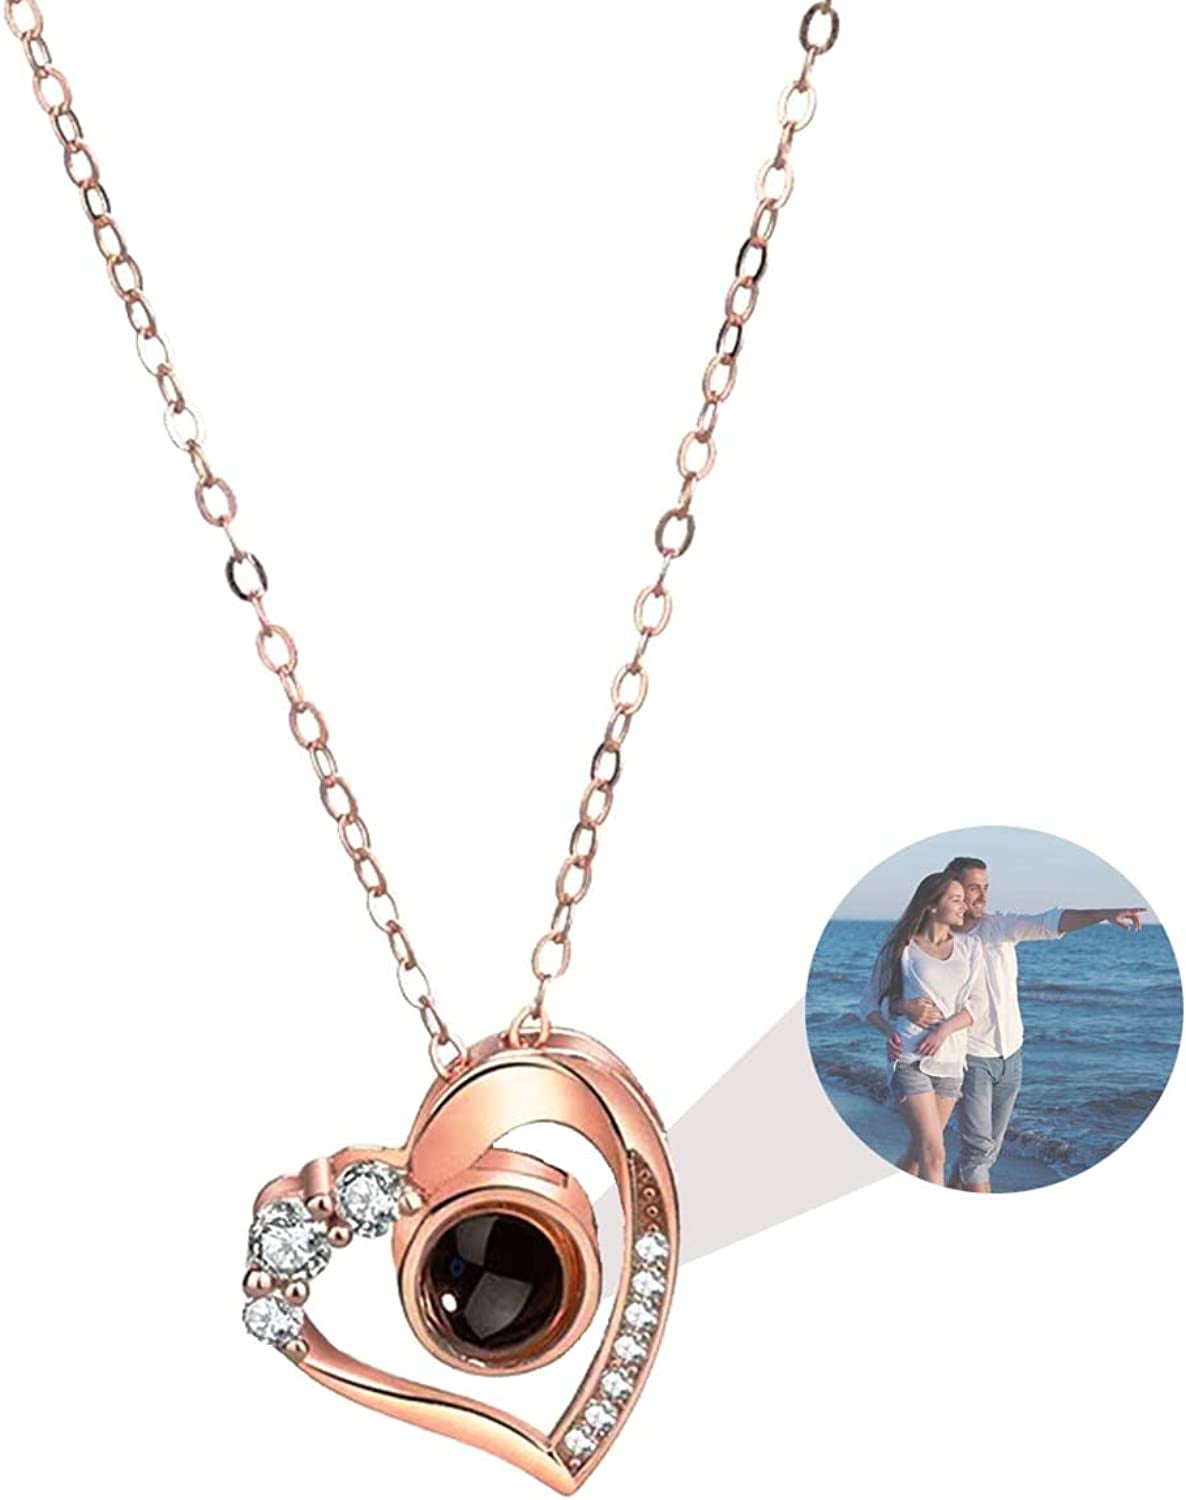 Heart Projection Necklace with Picture Inside - Customodish